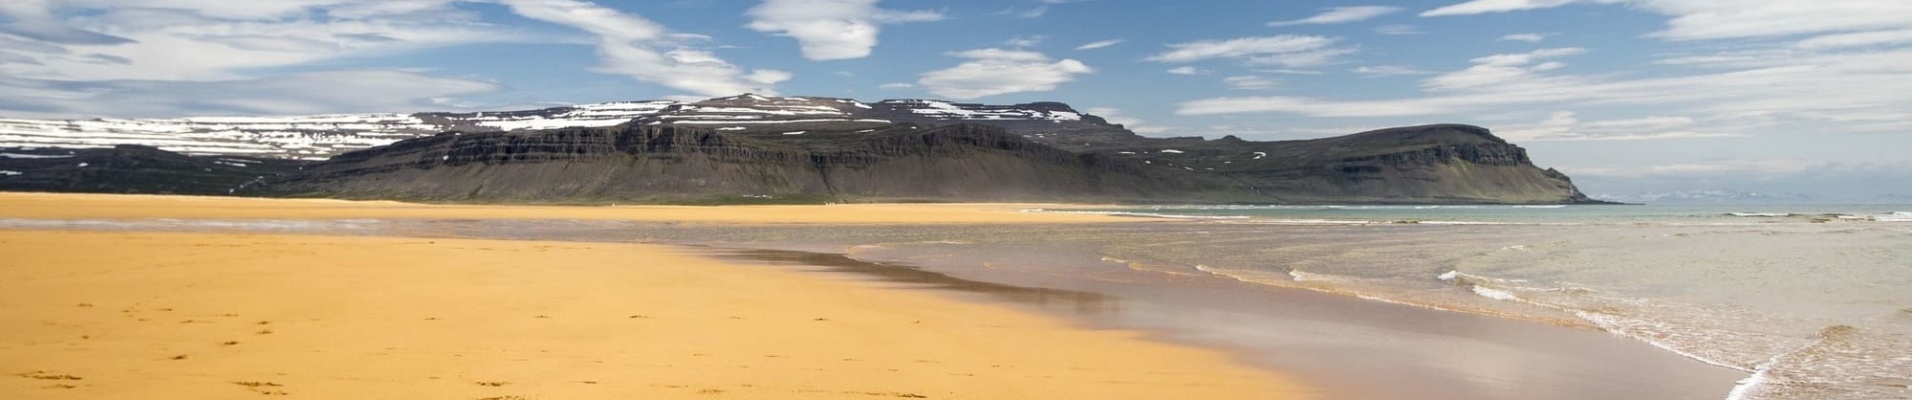 Iceland destinations - yellow sand beach and snowy mountains